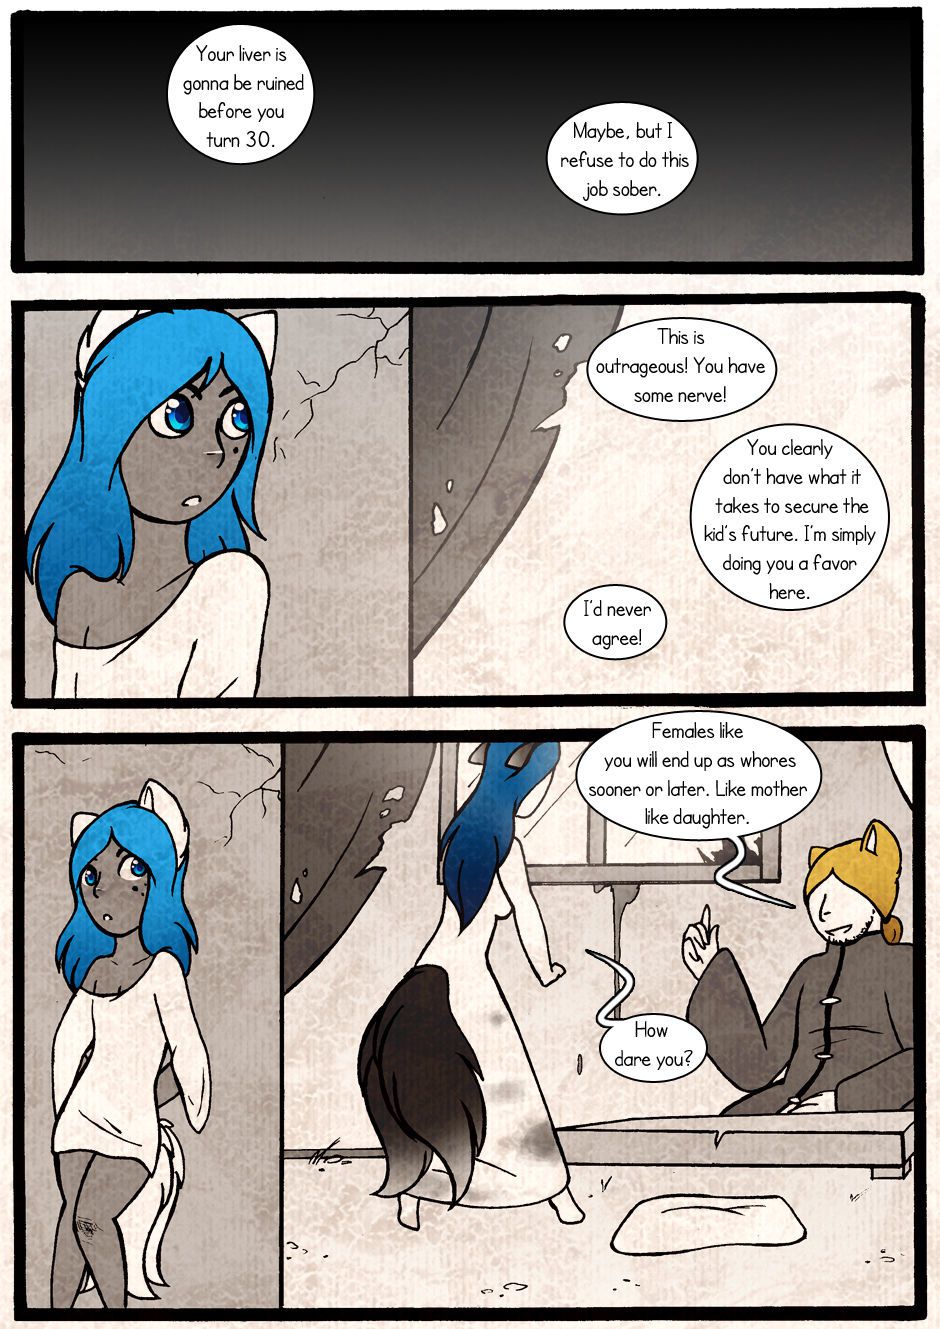 [Jeny-jen94] Between Kings and Queens [Ongoing] 70